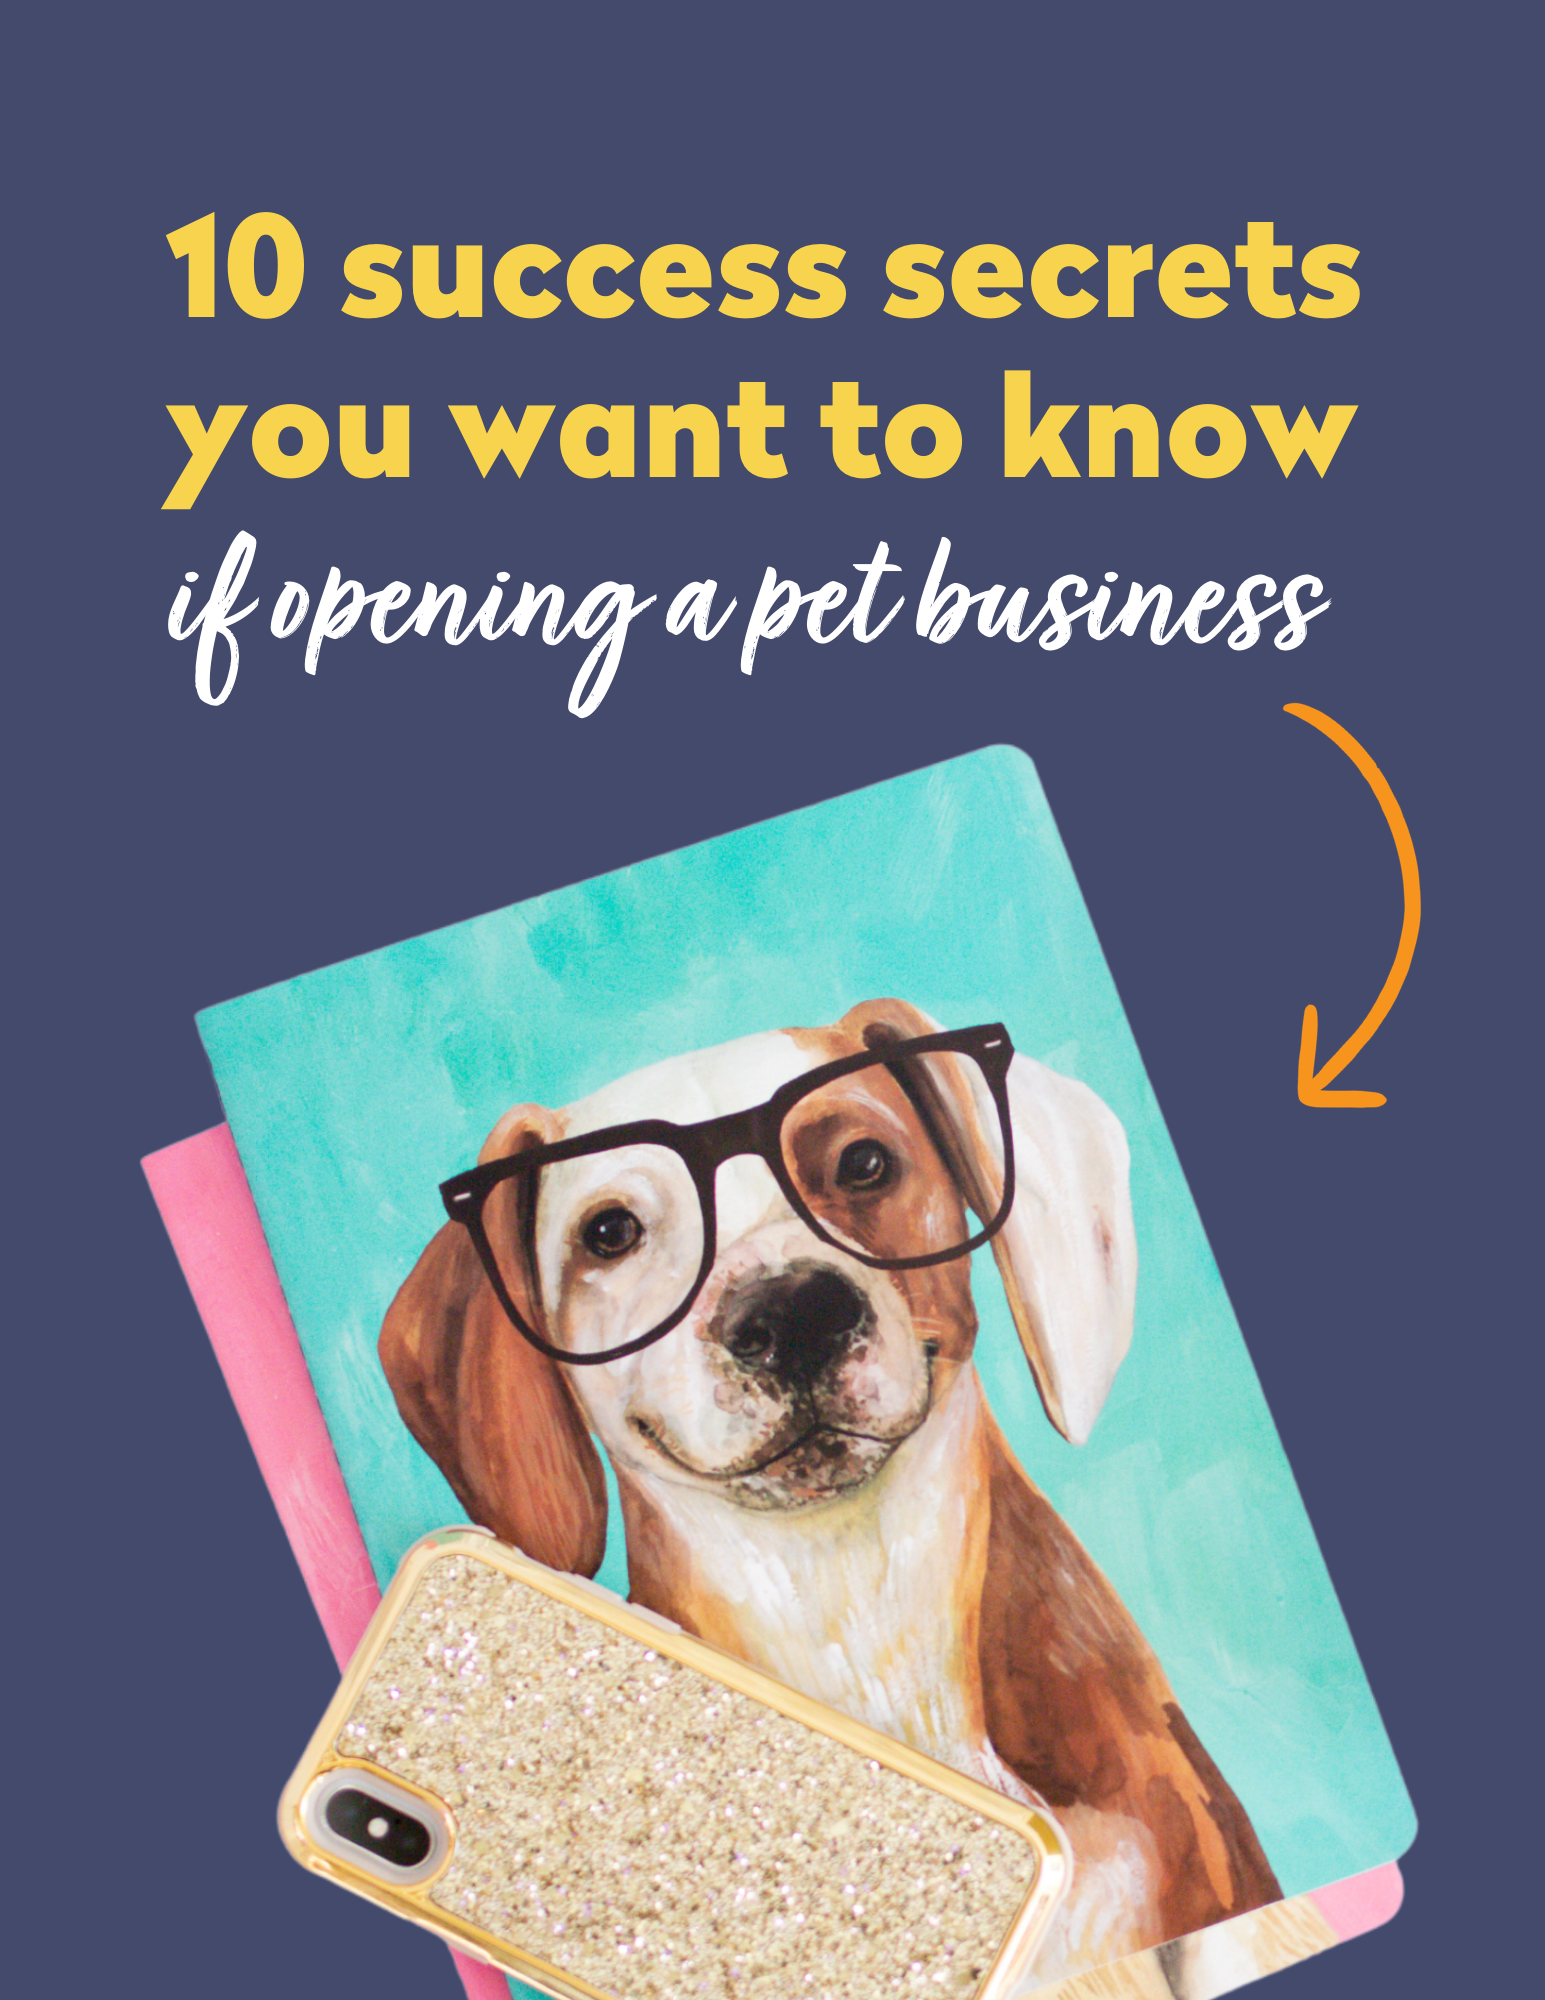 10 success secrets you want to know if opening a pet business